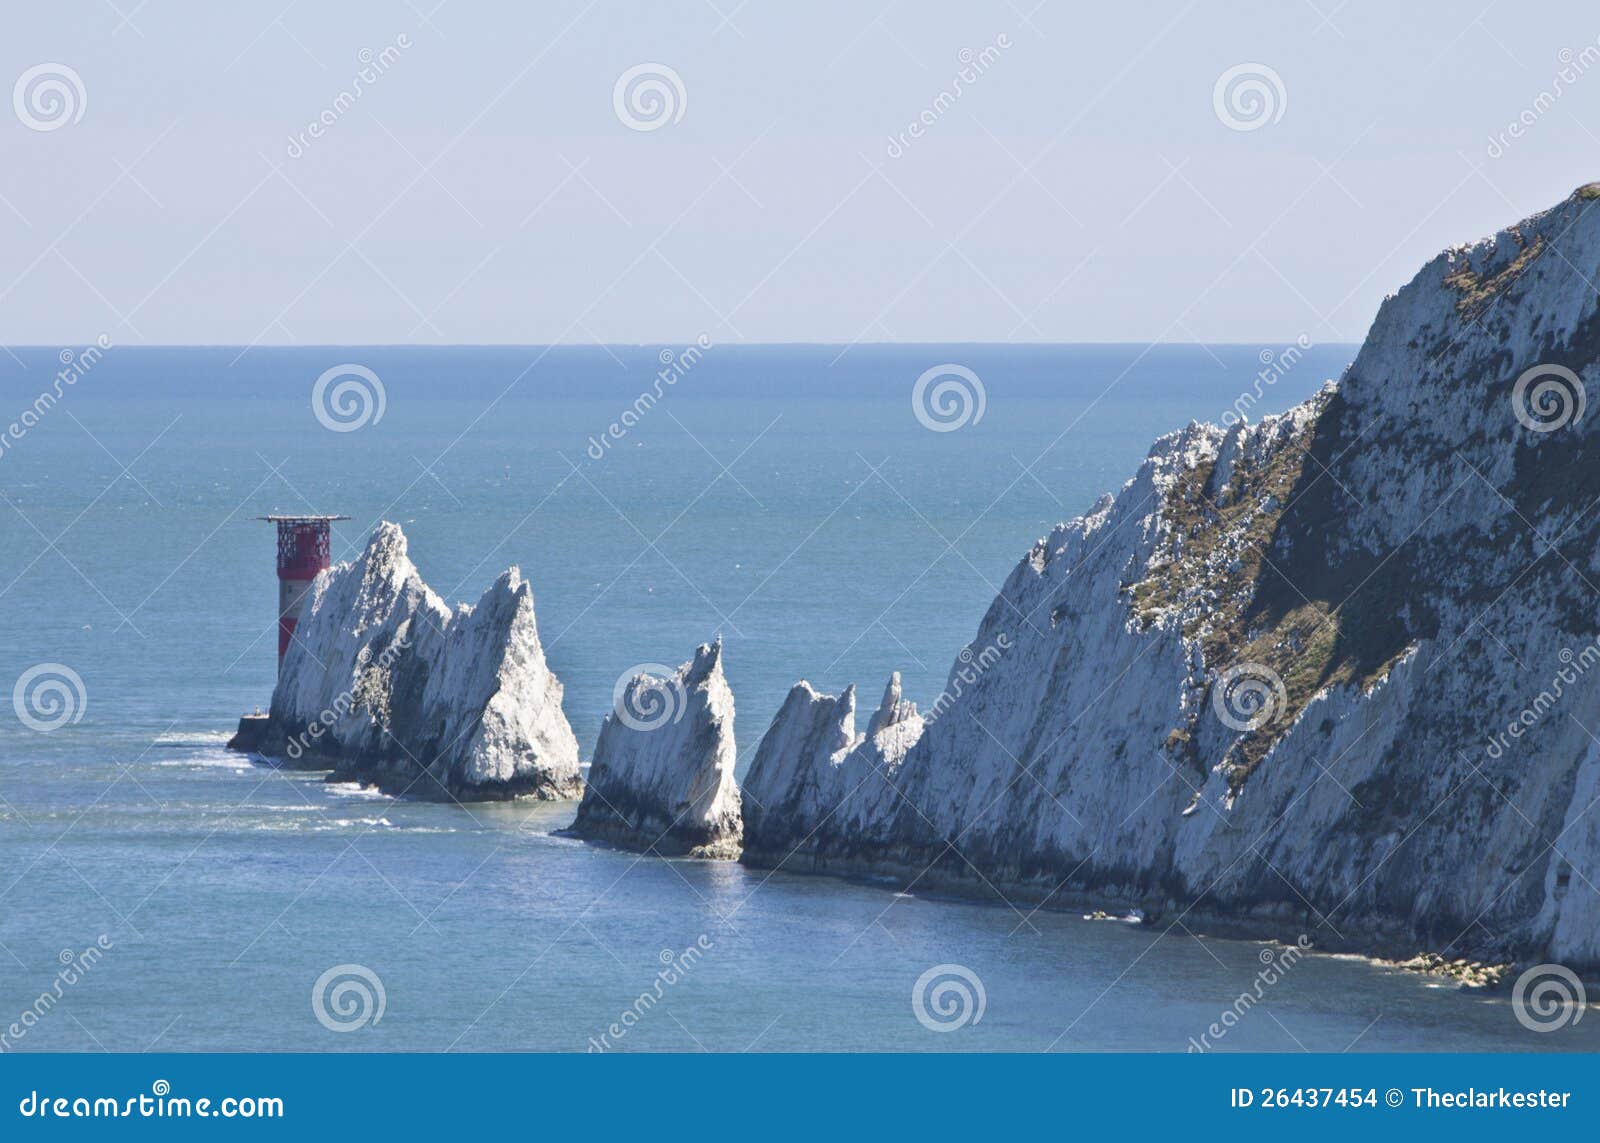 the famous isle of wight needles